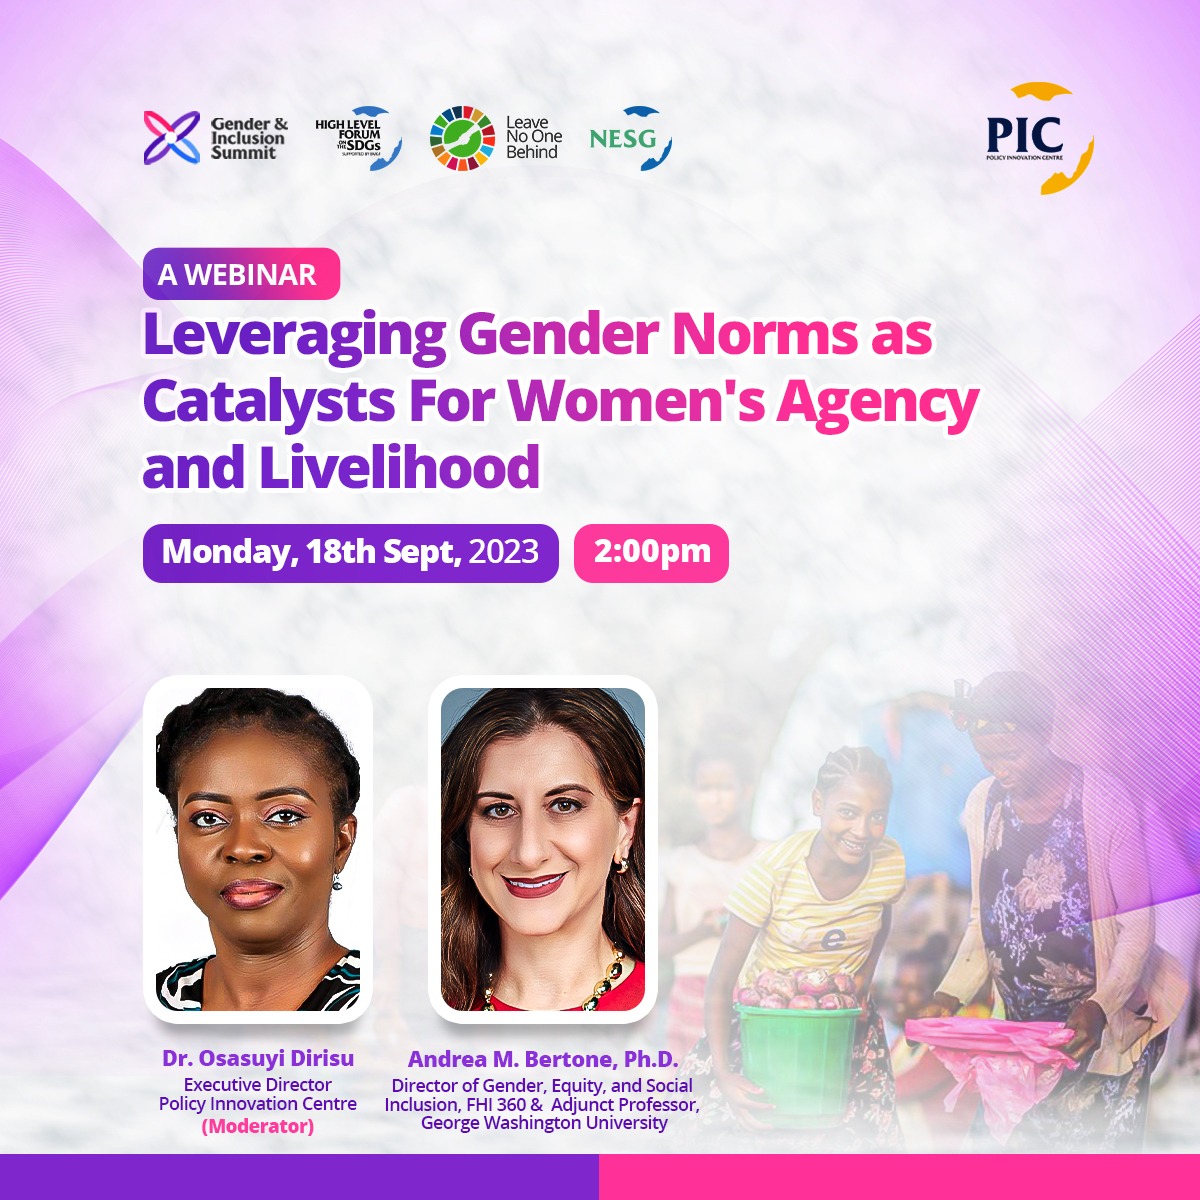 Leveraging Gender Norms as Catalyst For Women's Agency and Livelihood